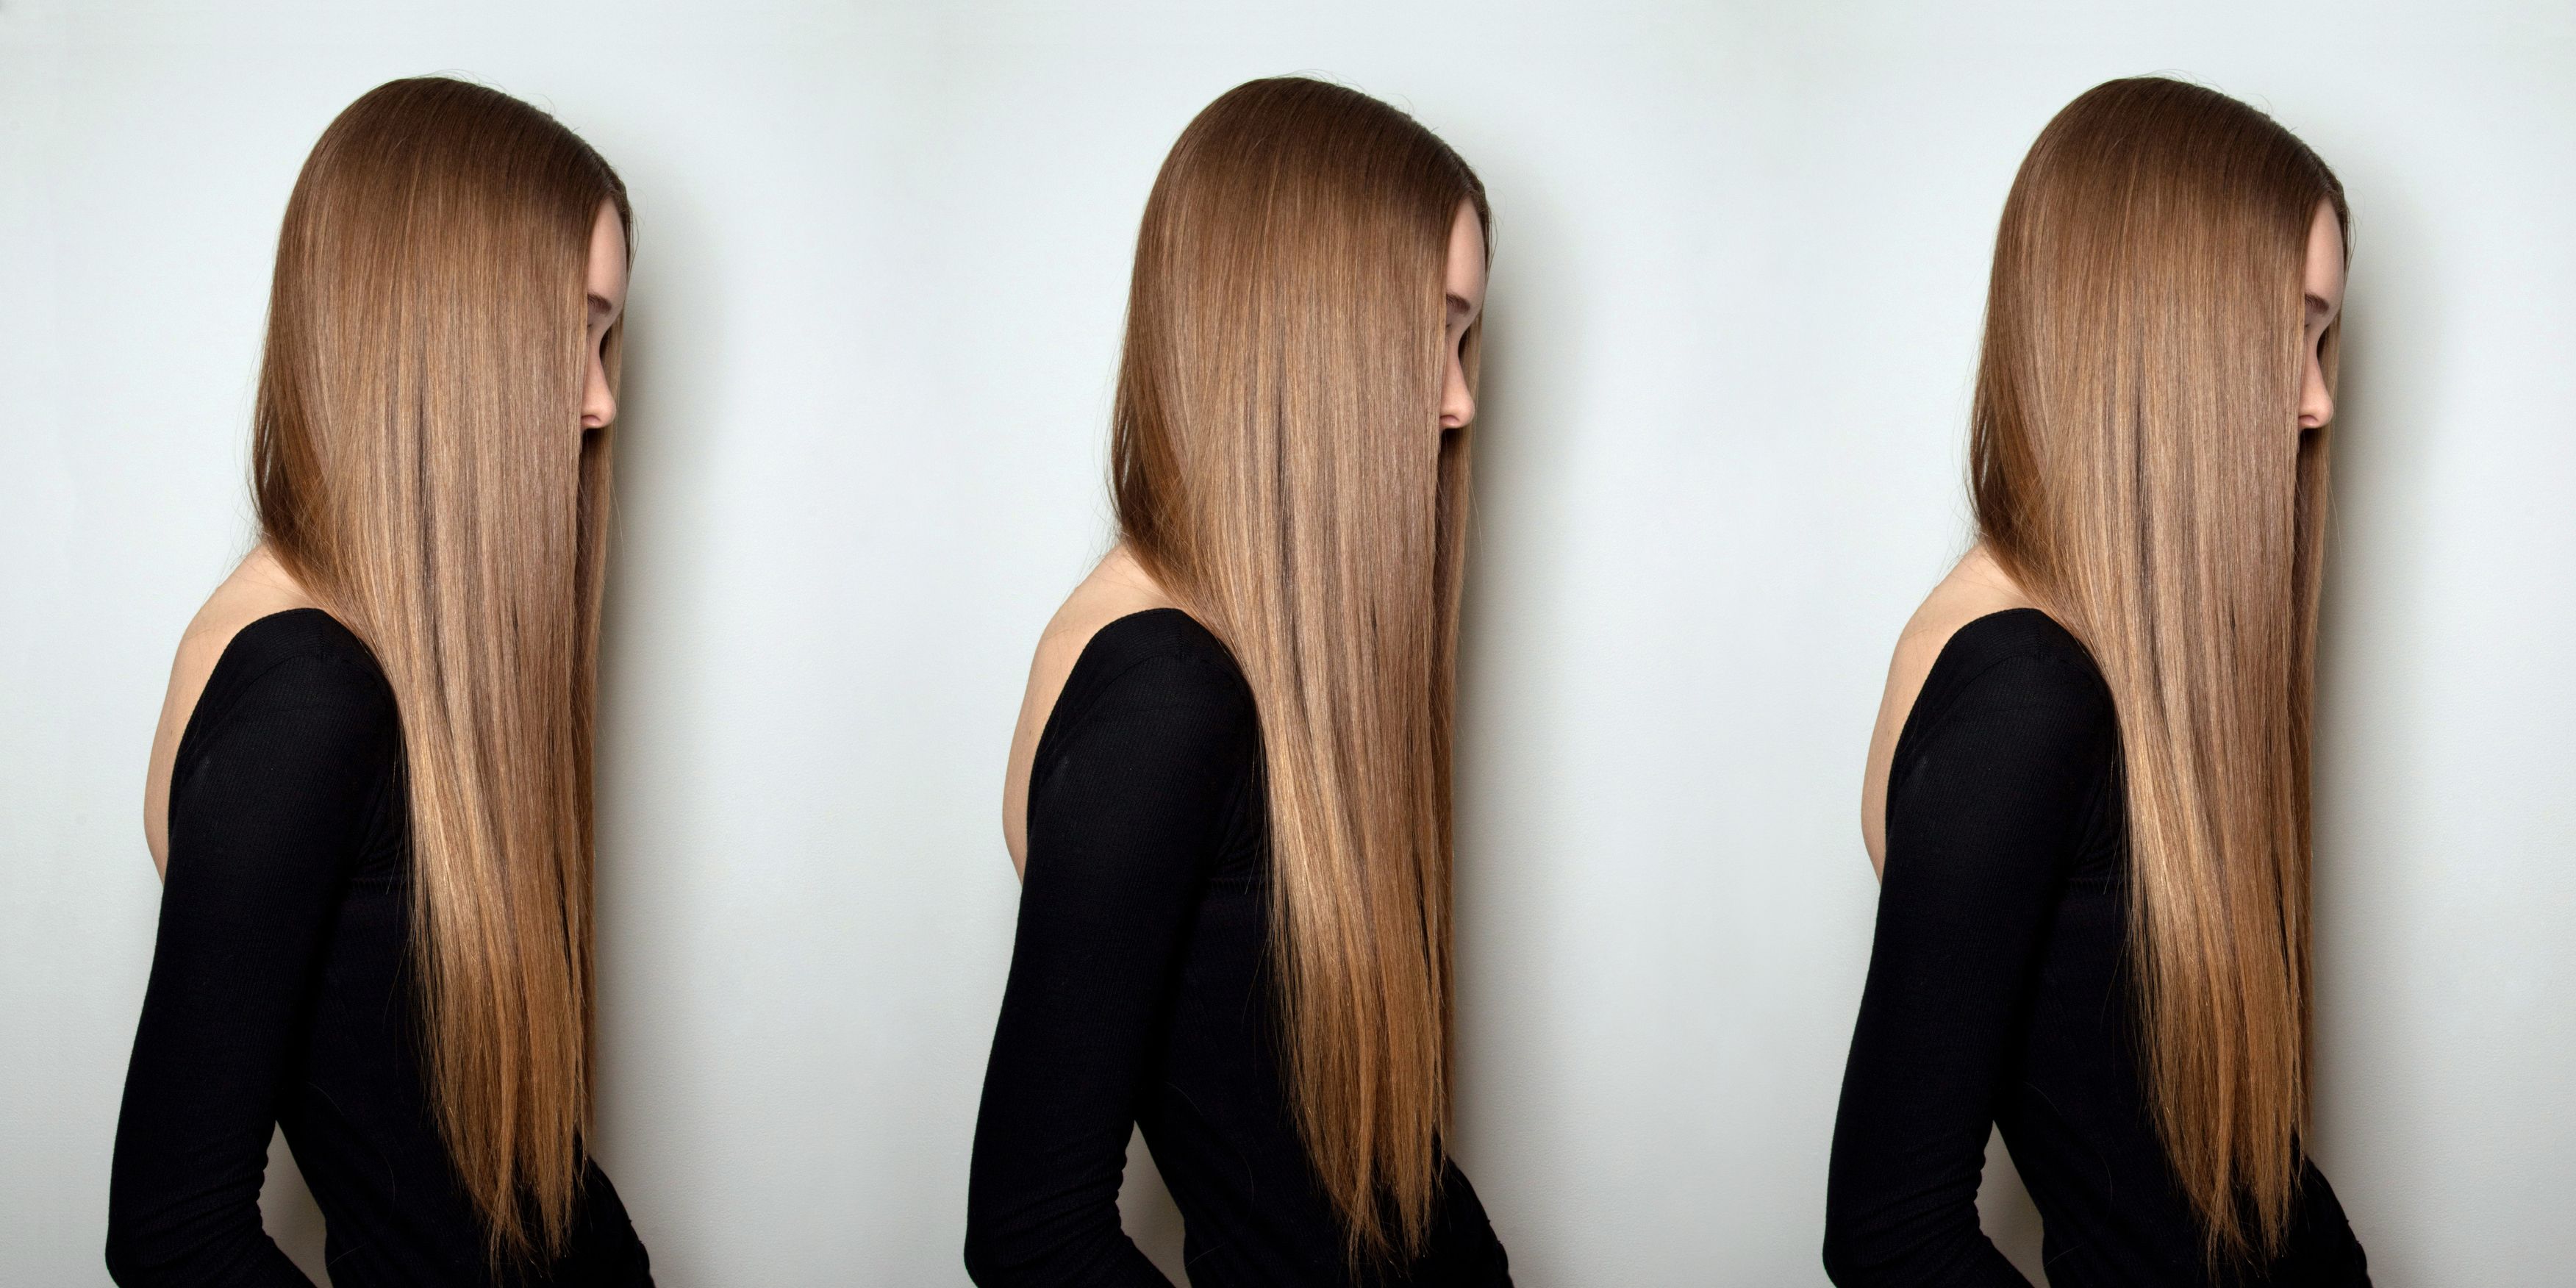 How To Straighten Hair Without Heat Professional Heatless Hair